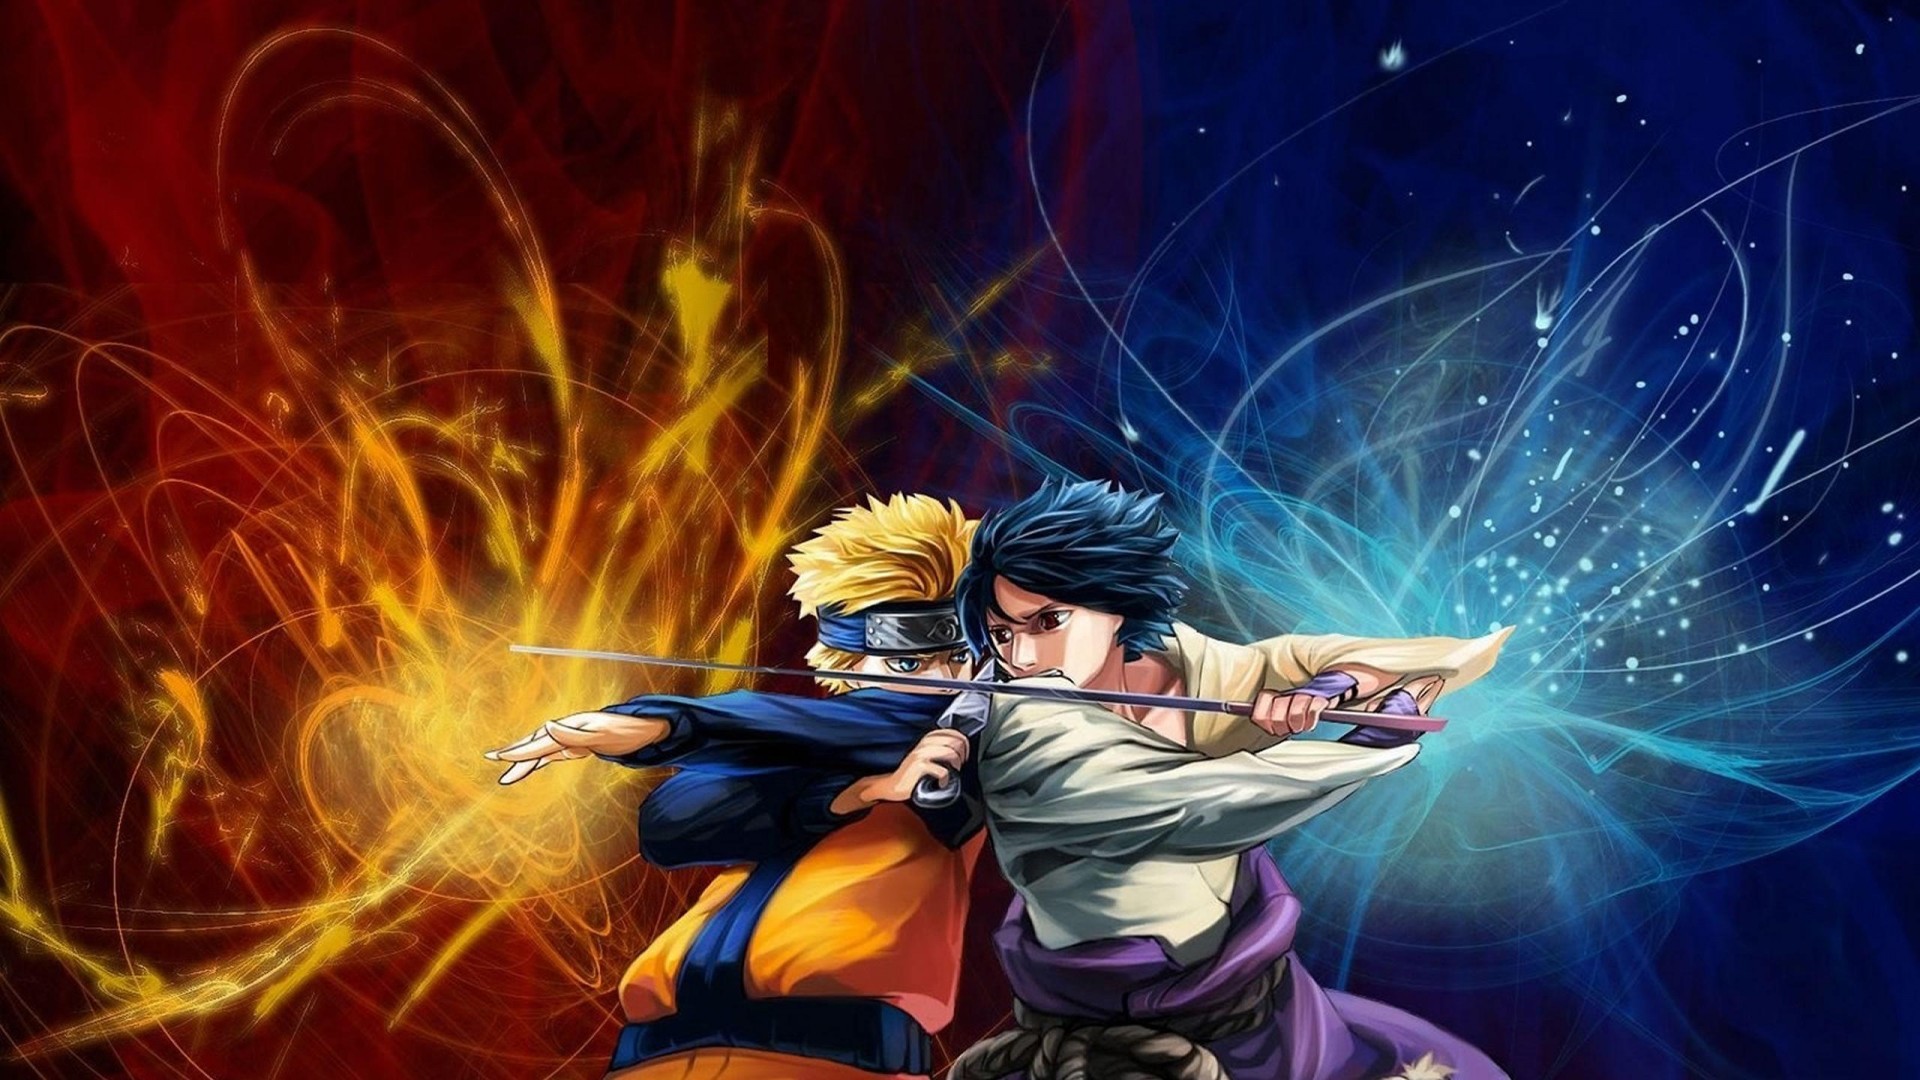 Naruto Wallpapers 1920x1080 74 Pictures